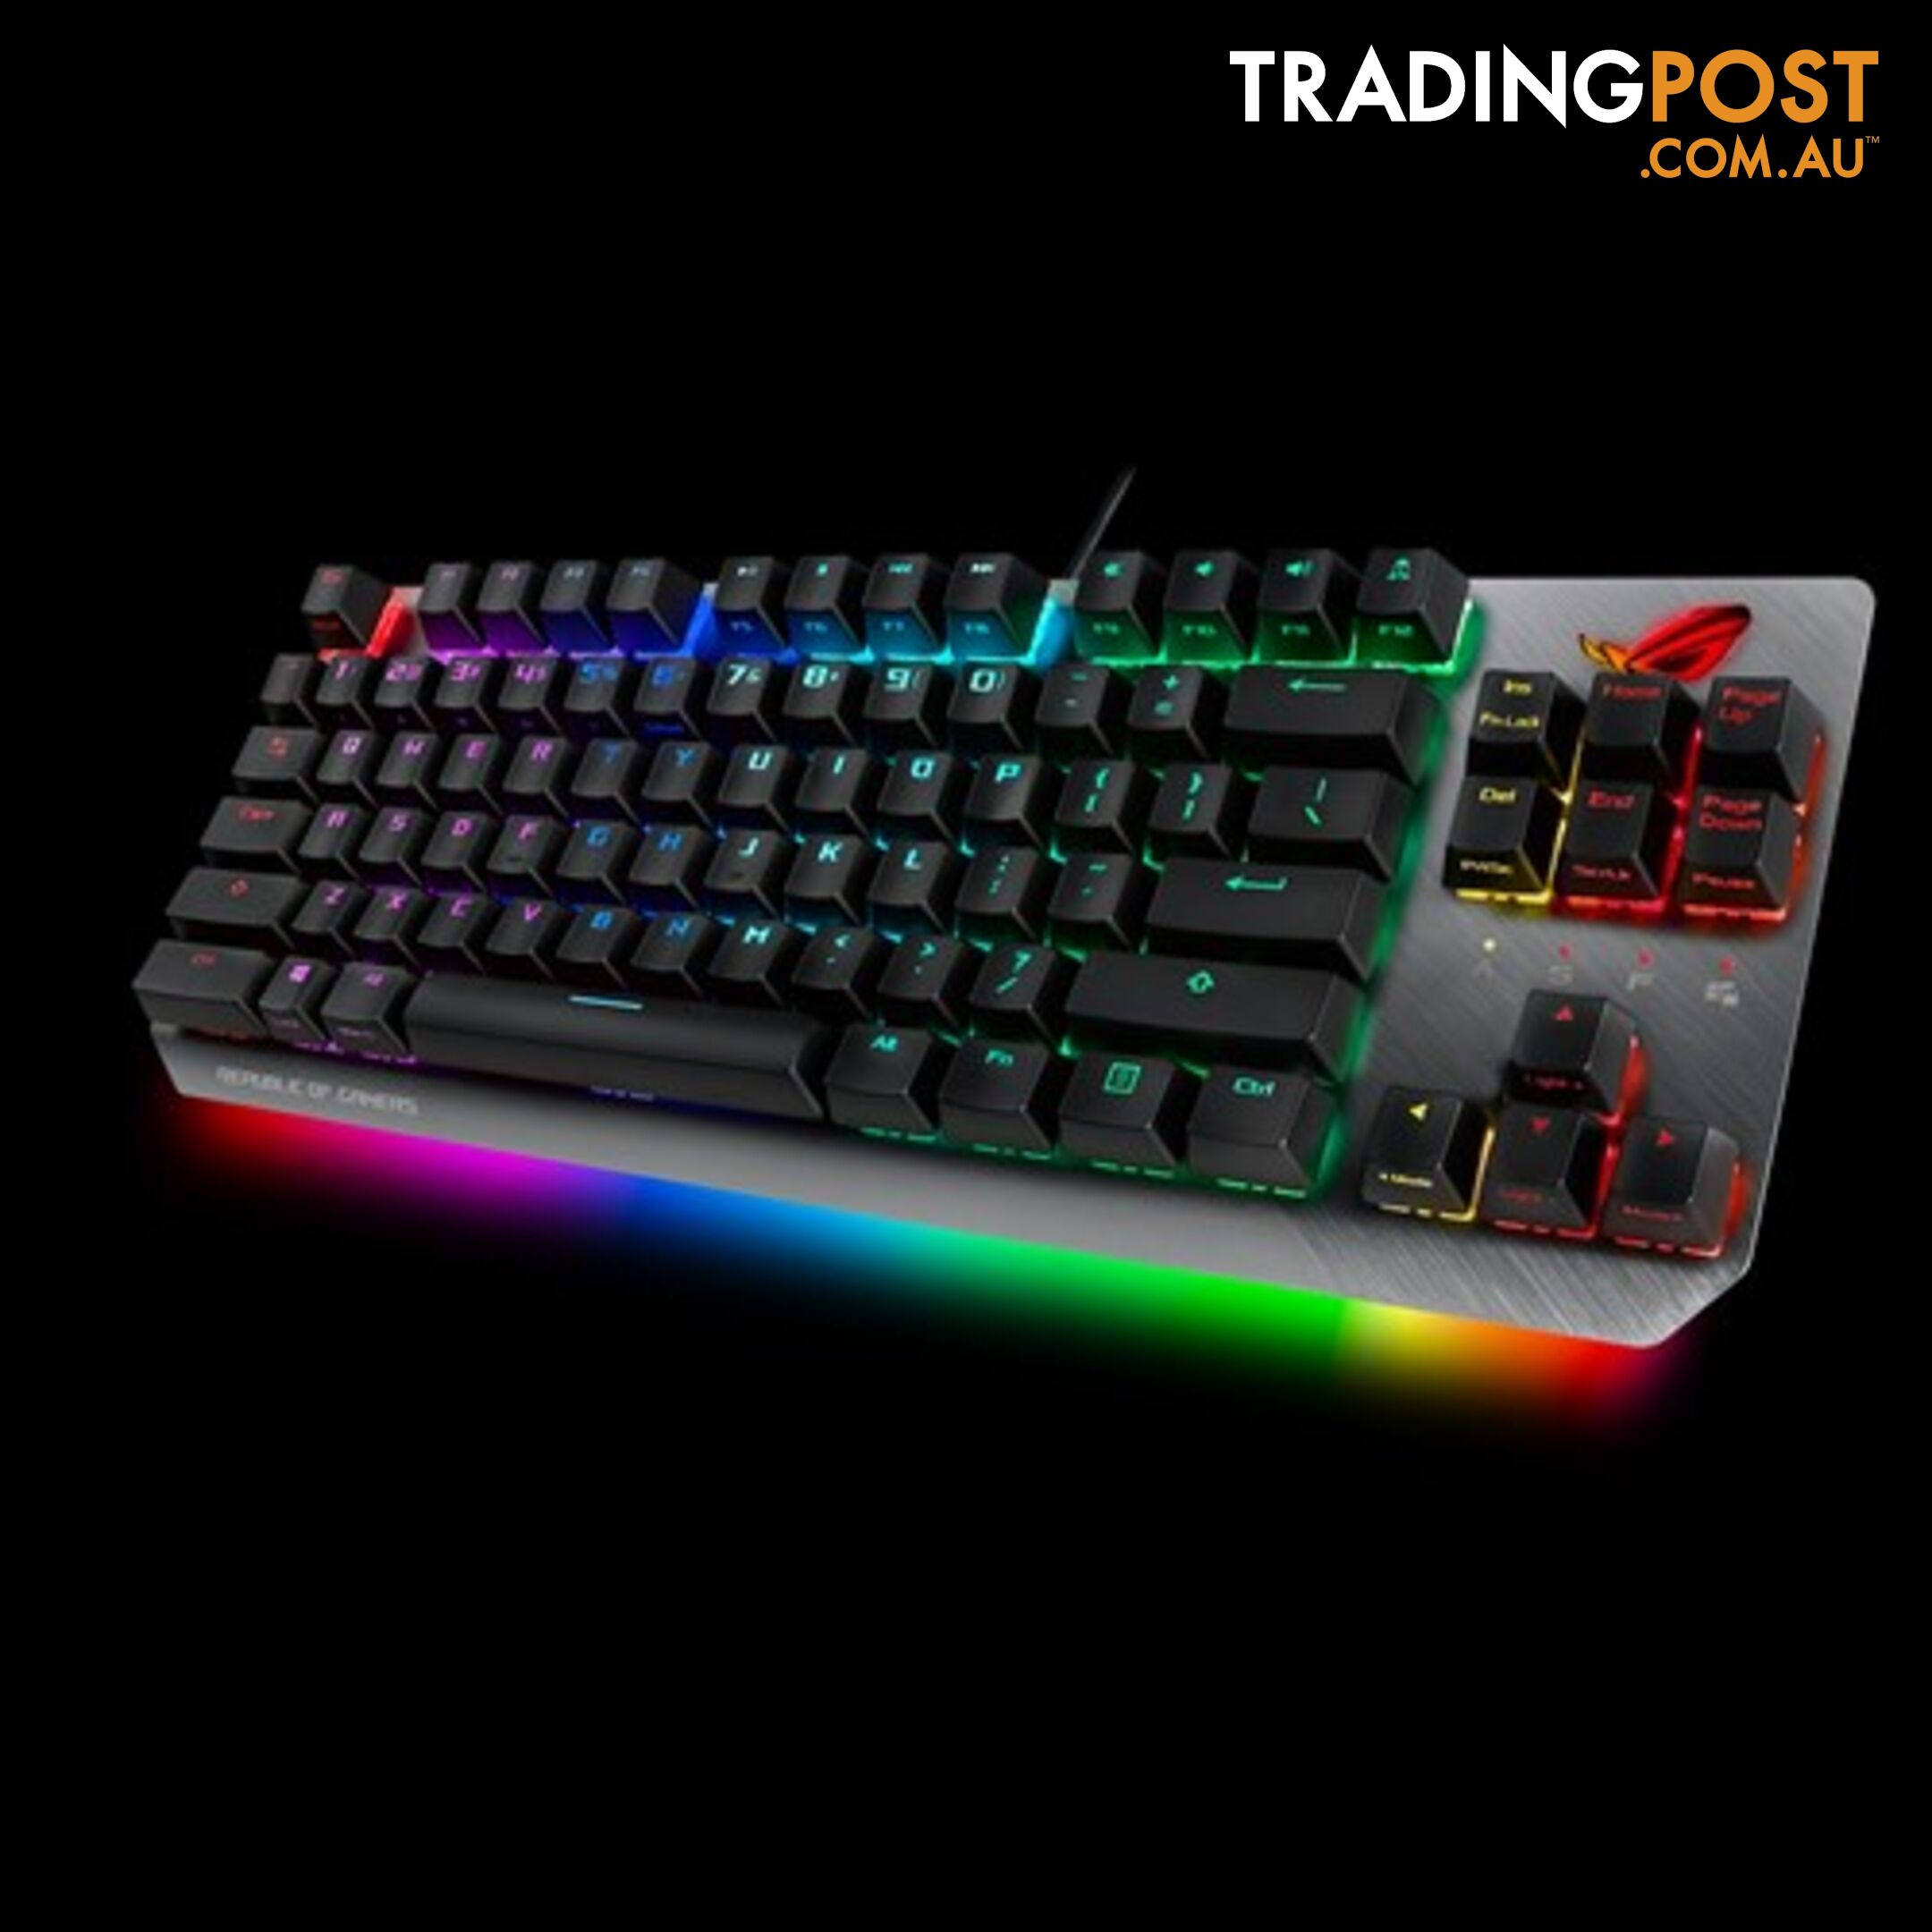 ASUS X802 STRIX SCOPE TKL/BL TKL Wired Mechanical RGB Gaming Keyboard For FPS Games, Cherry MX Switches, Aluminum Frame, Aura Sync Lighting - KBA-STRIX-SCOPE-BLT